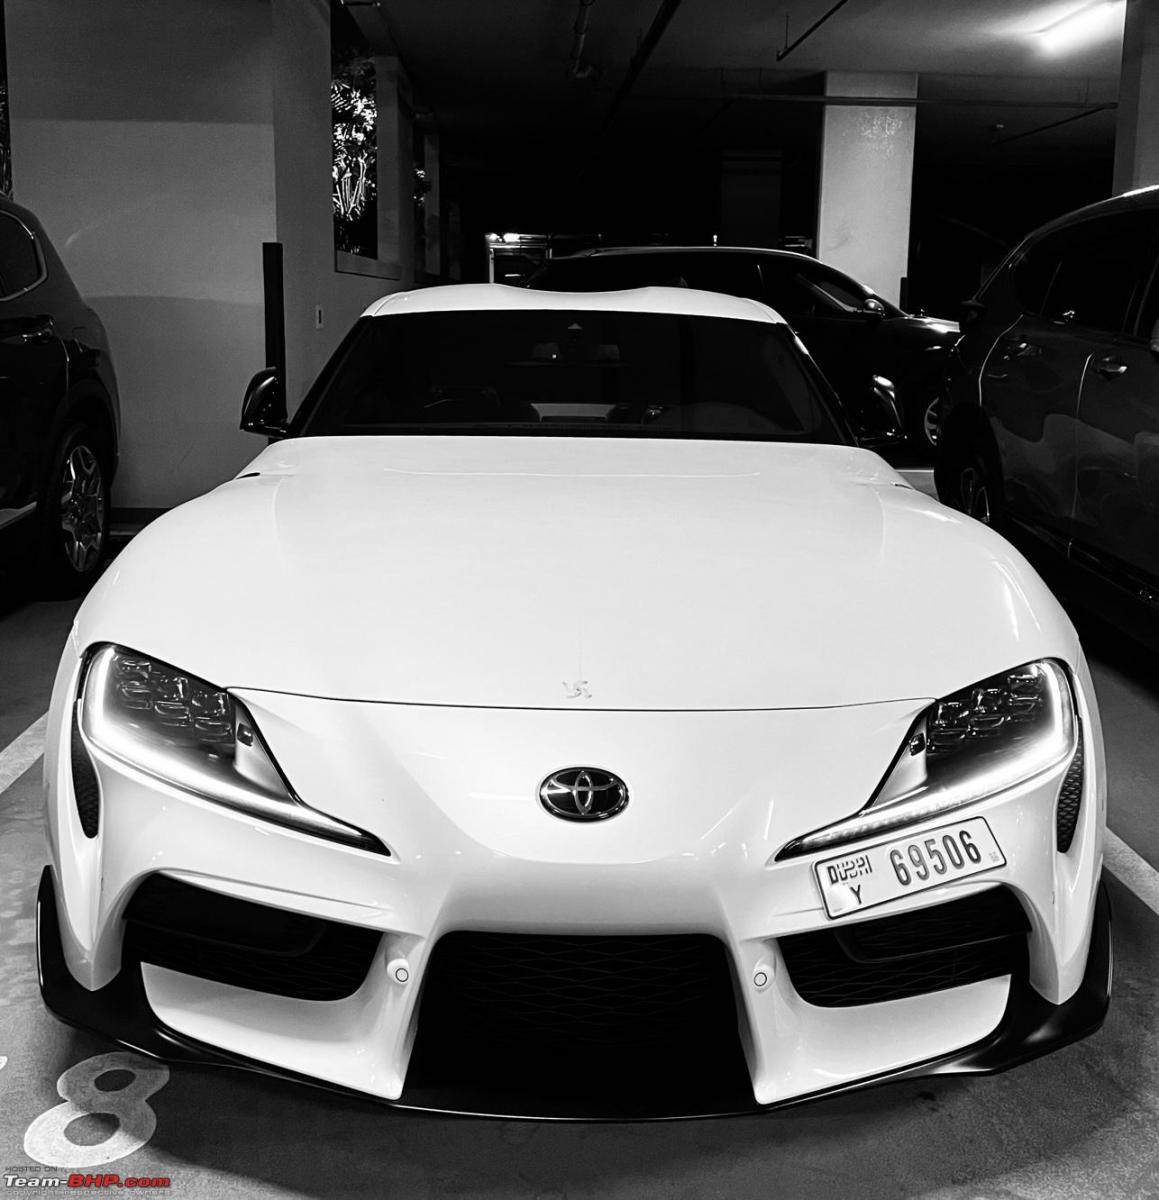 My 2022 Toyota Supra 3.0 GR: Booking, delivery & initial